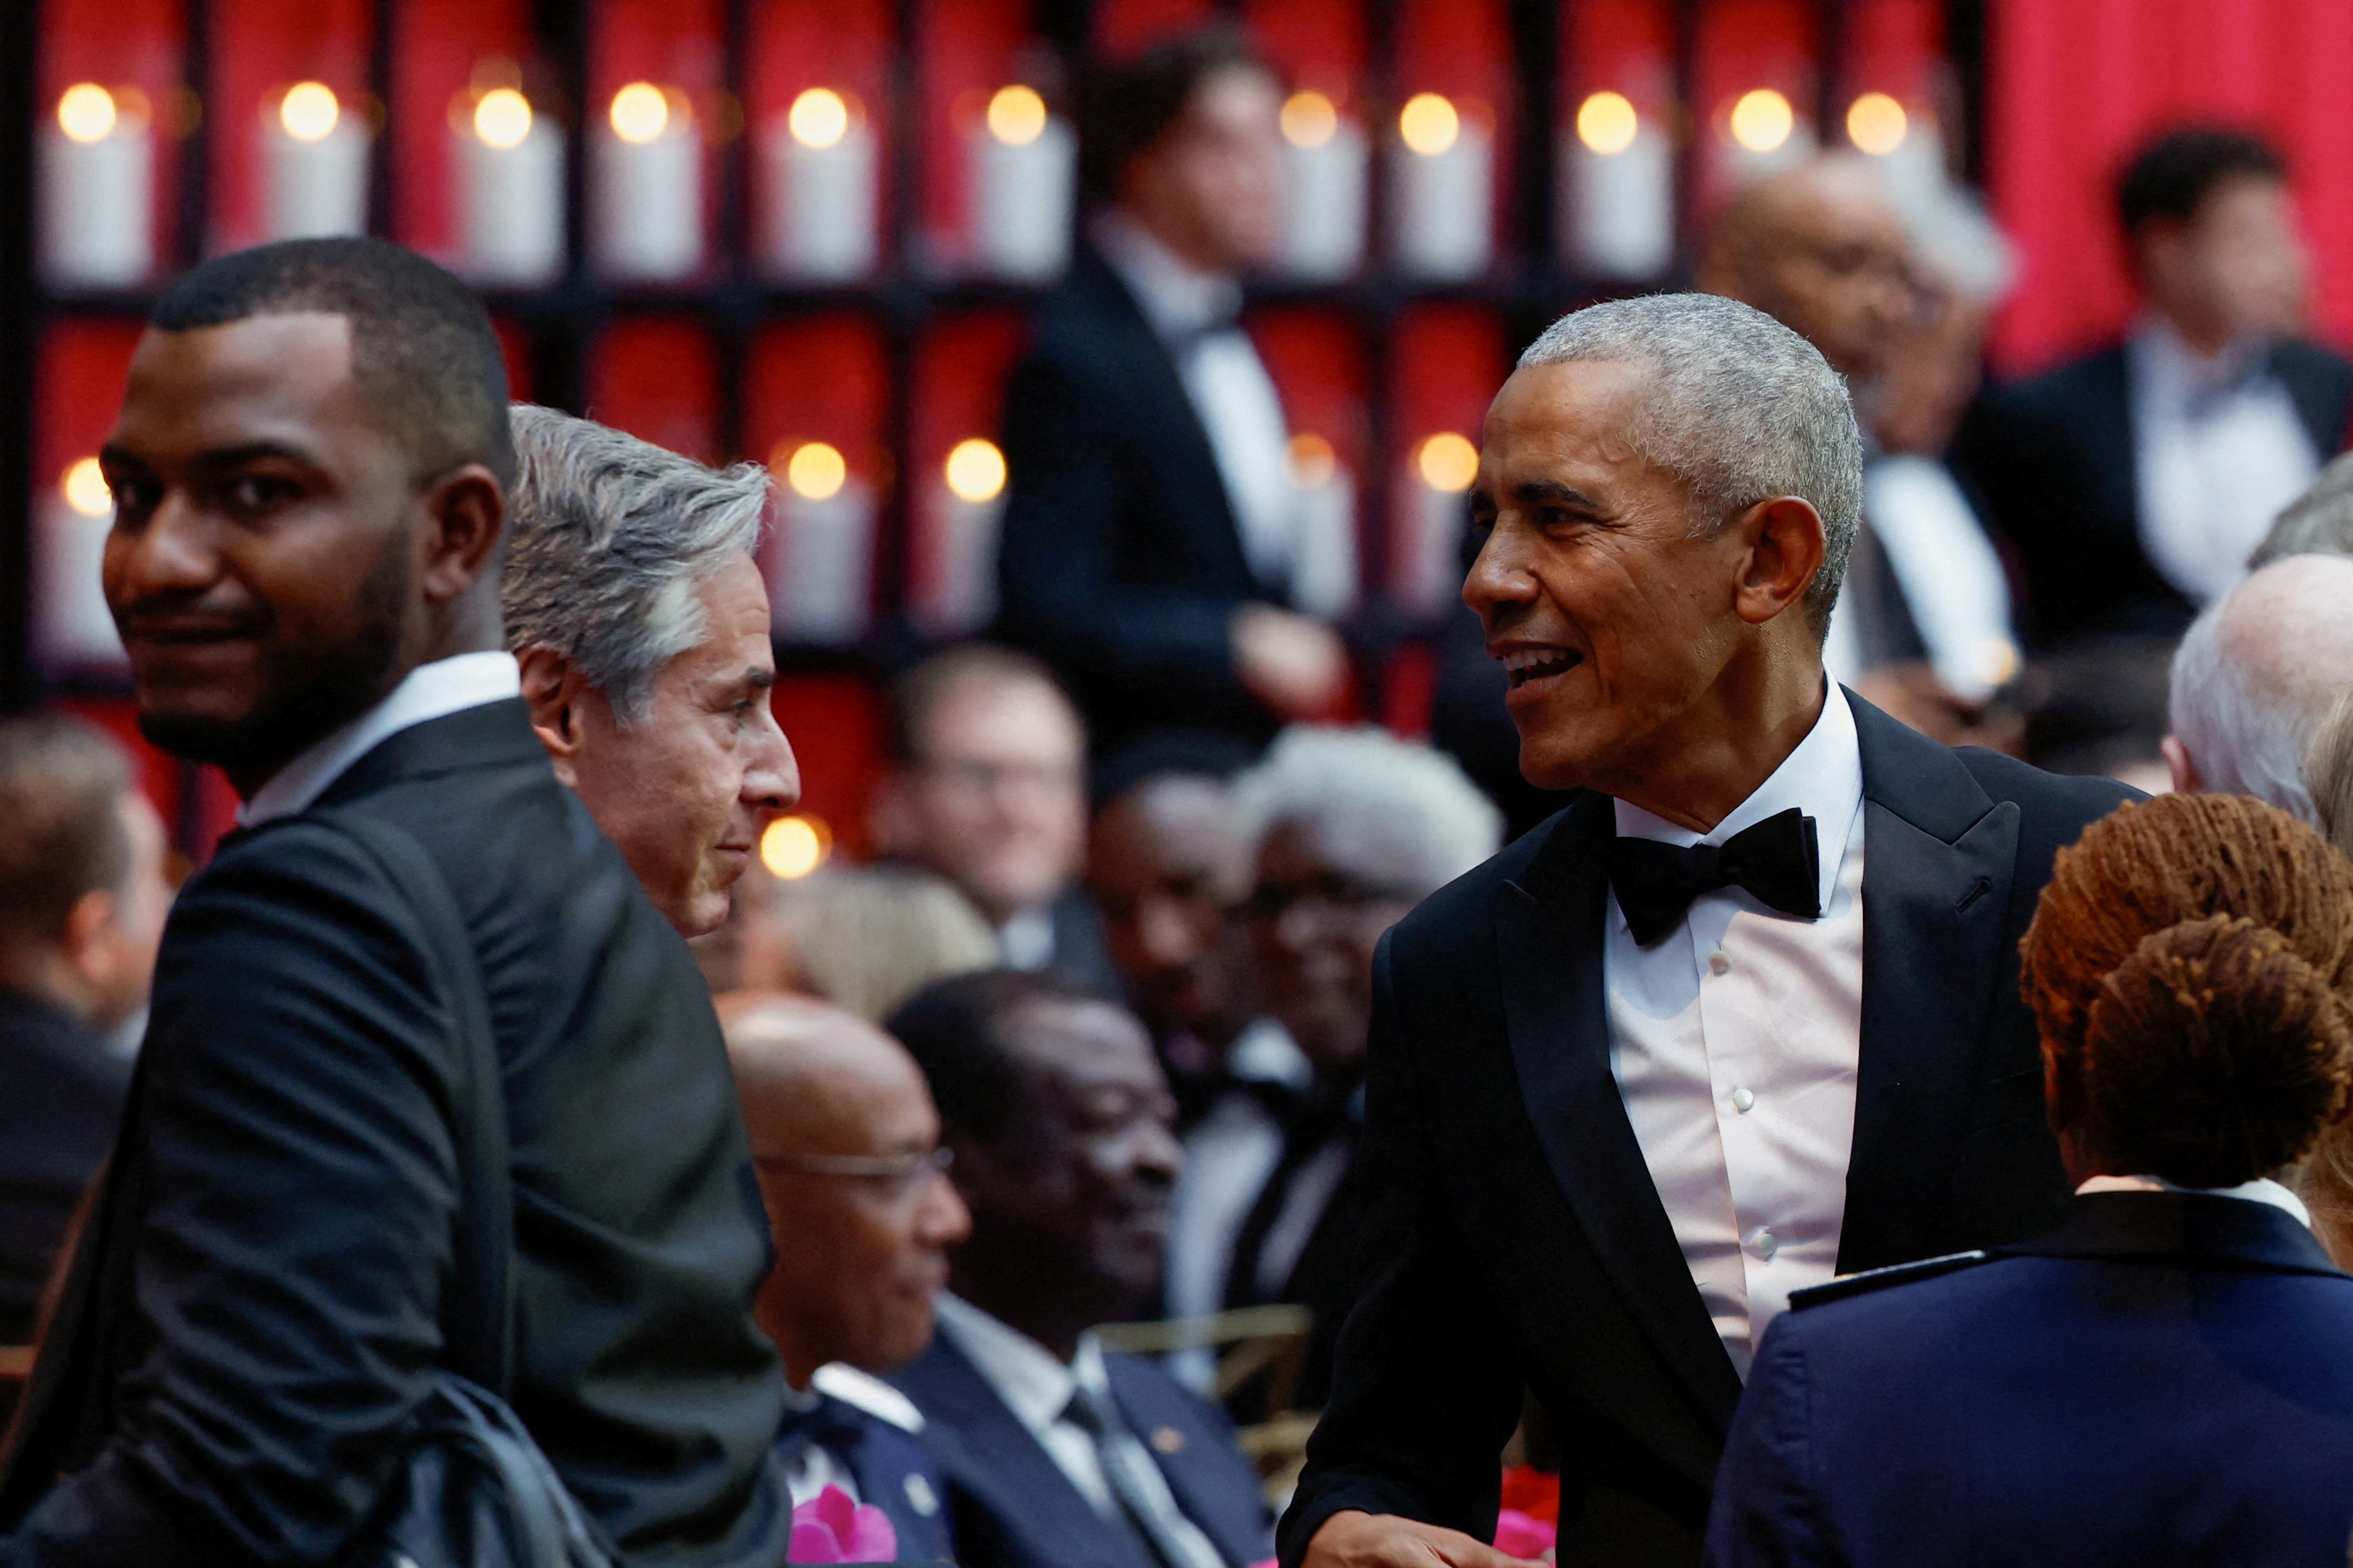 Former president Barack Obama briefly attended the official State Dinner in honour of Kenya’s President William Ruto at the White House